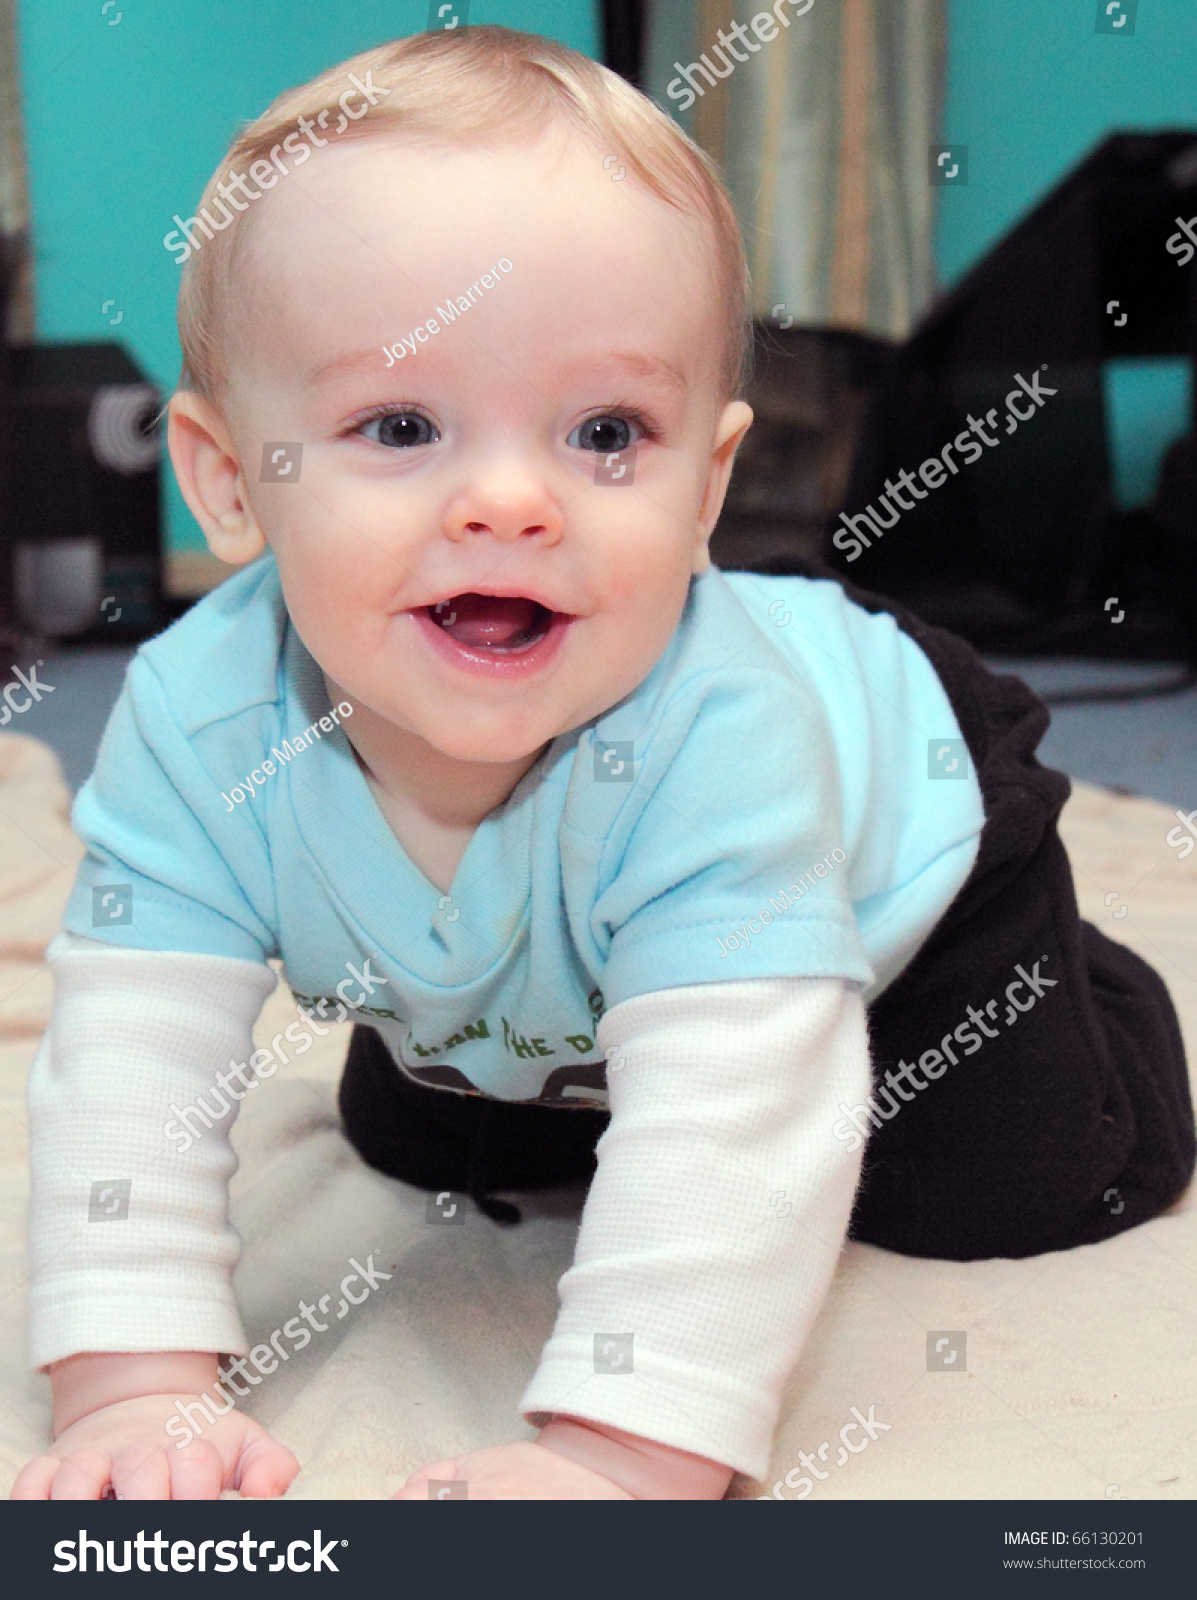 Royalty Free Happy Baby Boy With Blonde Hair And 66130201 Stock